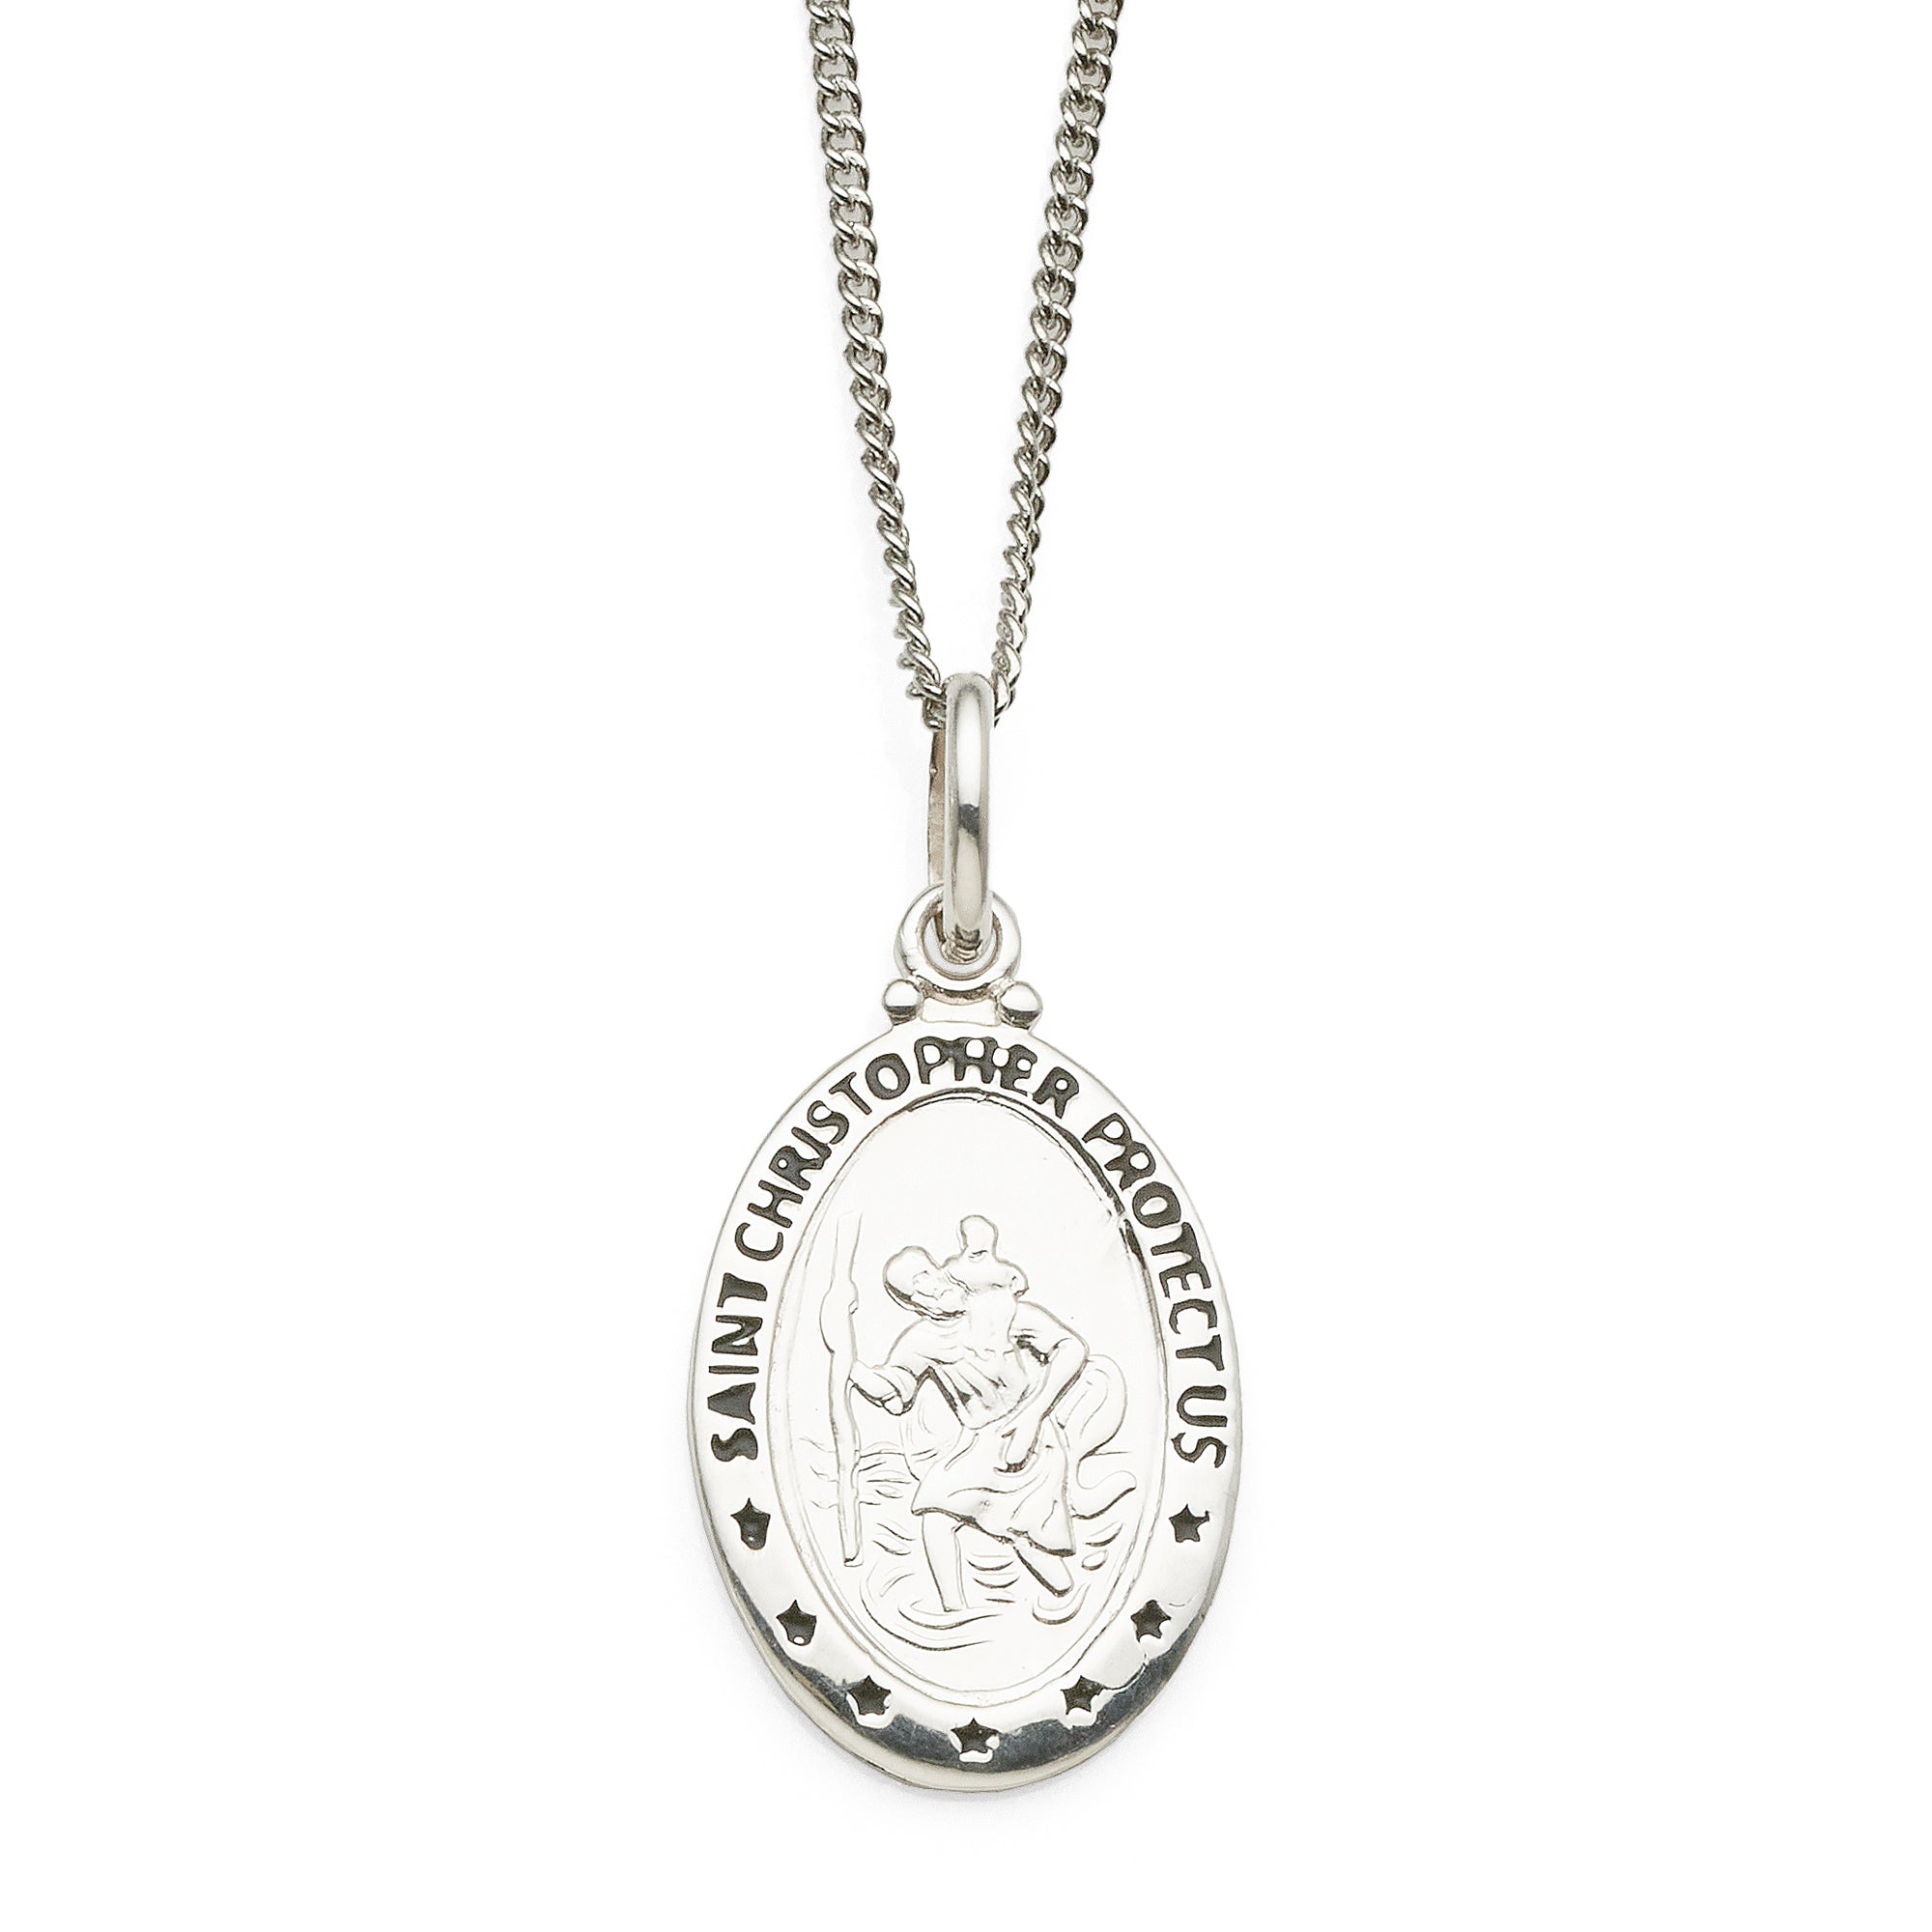 Boy s St Christopher gift - leather necklace